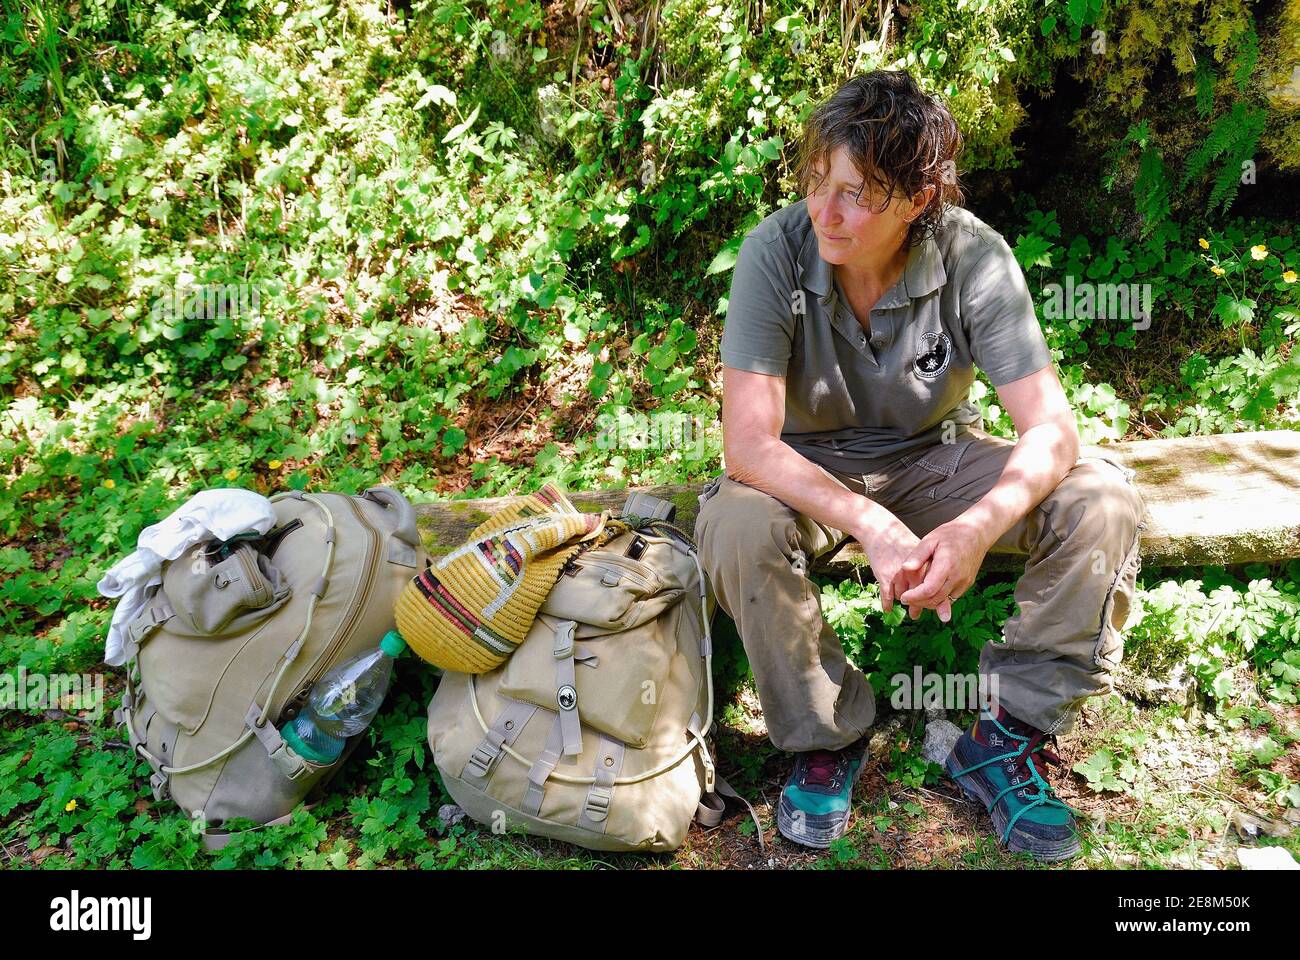 mount Krn, Slovenia.A tired woman rests after a day of trekking. Stock Photo